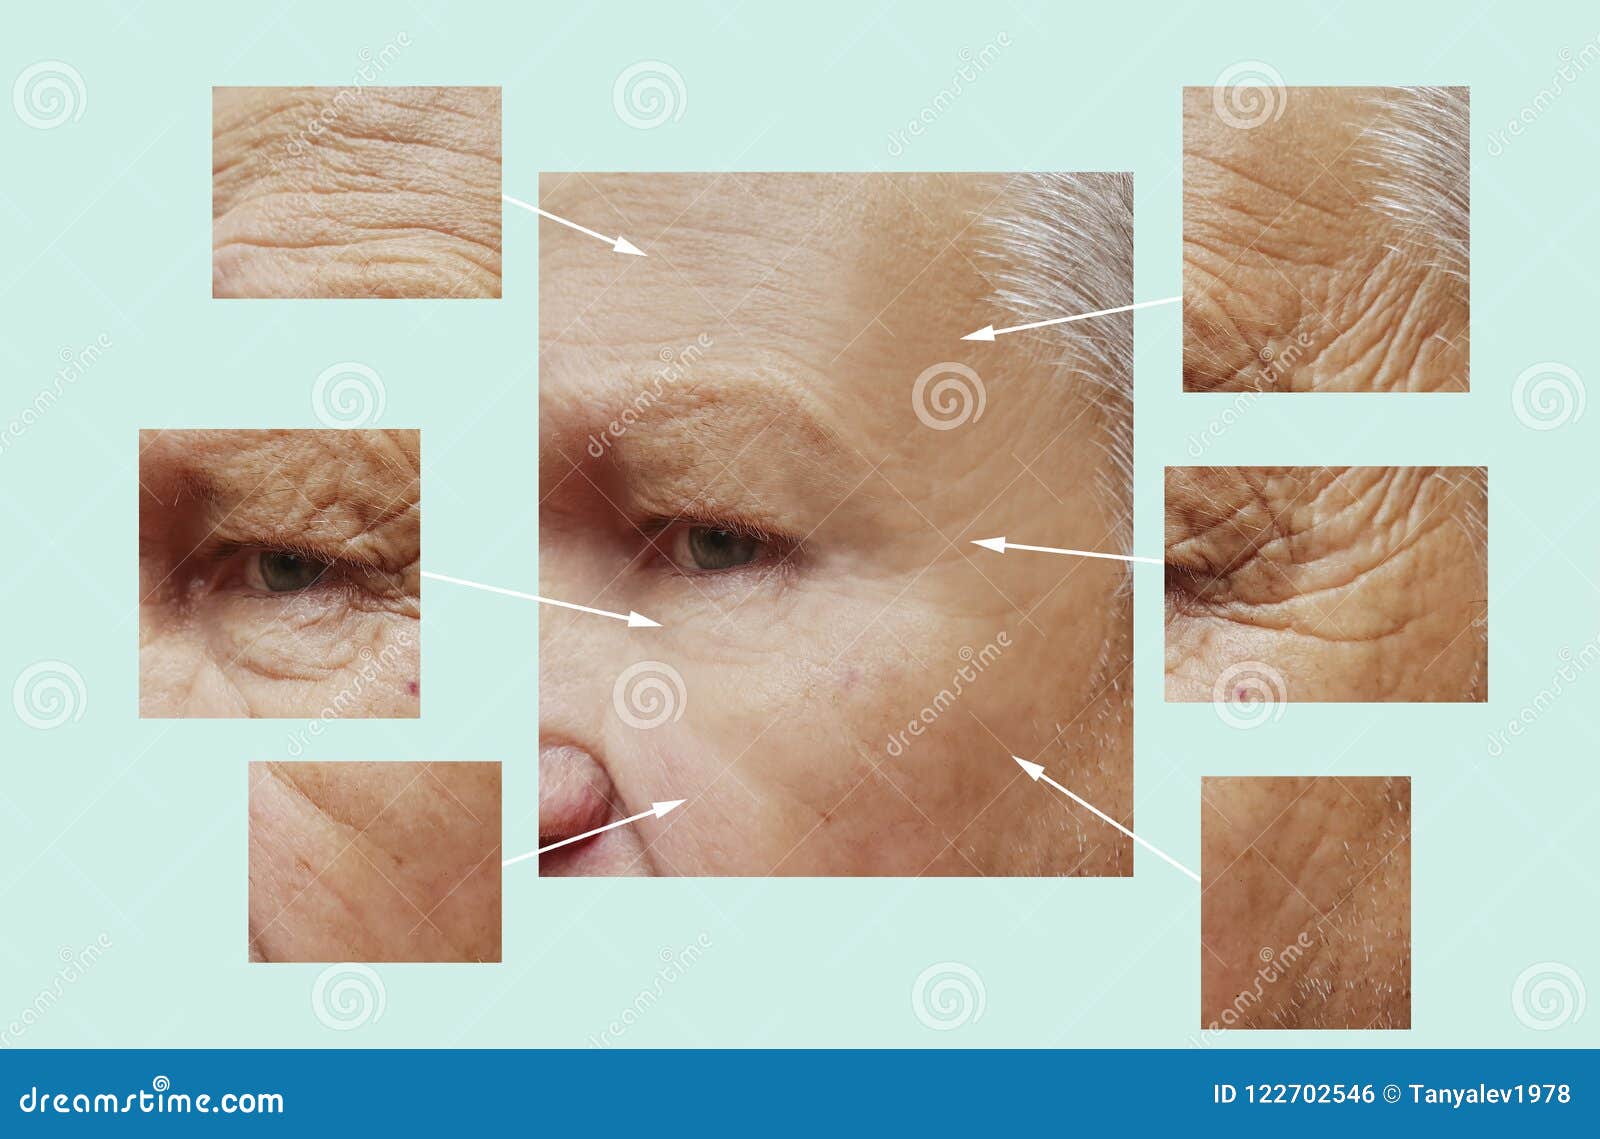 man of old wrinkles on face before after therapy dermatology medicine filler collagen hydrating removal, aging procedures